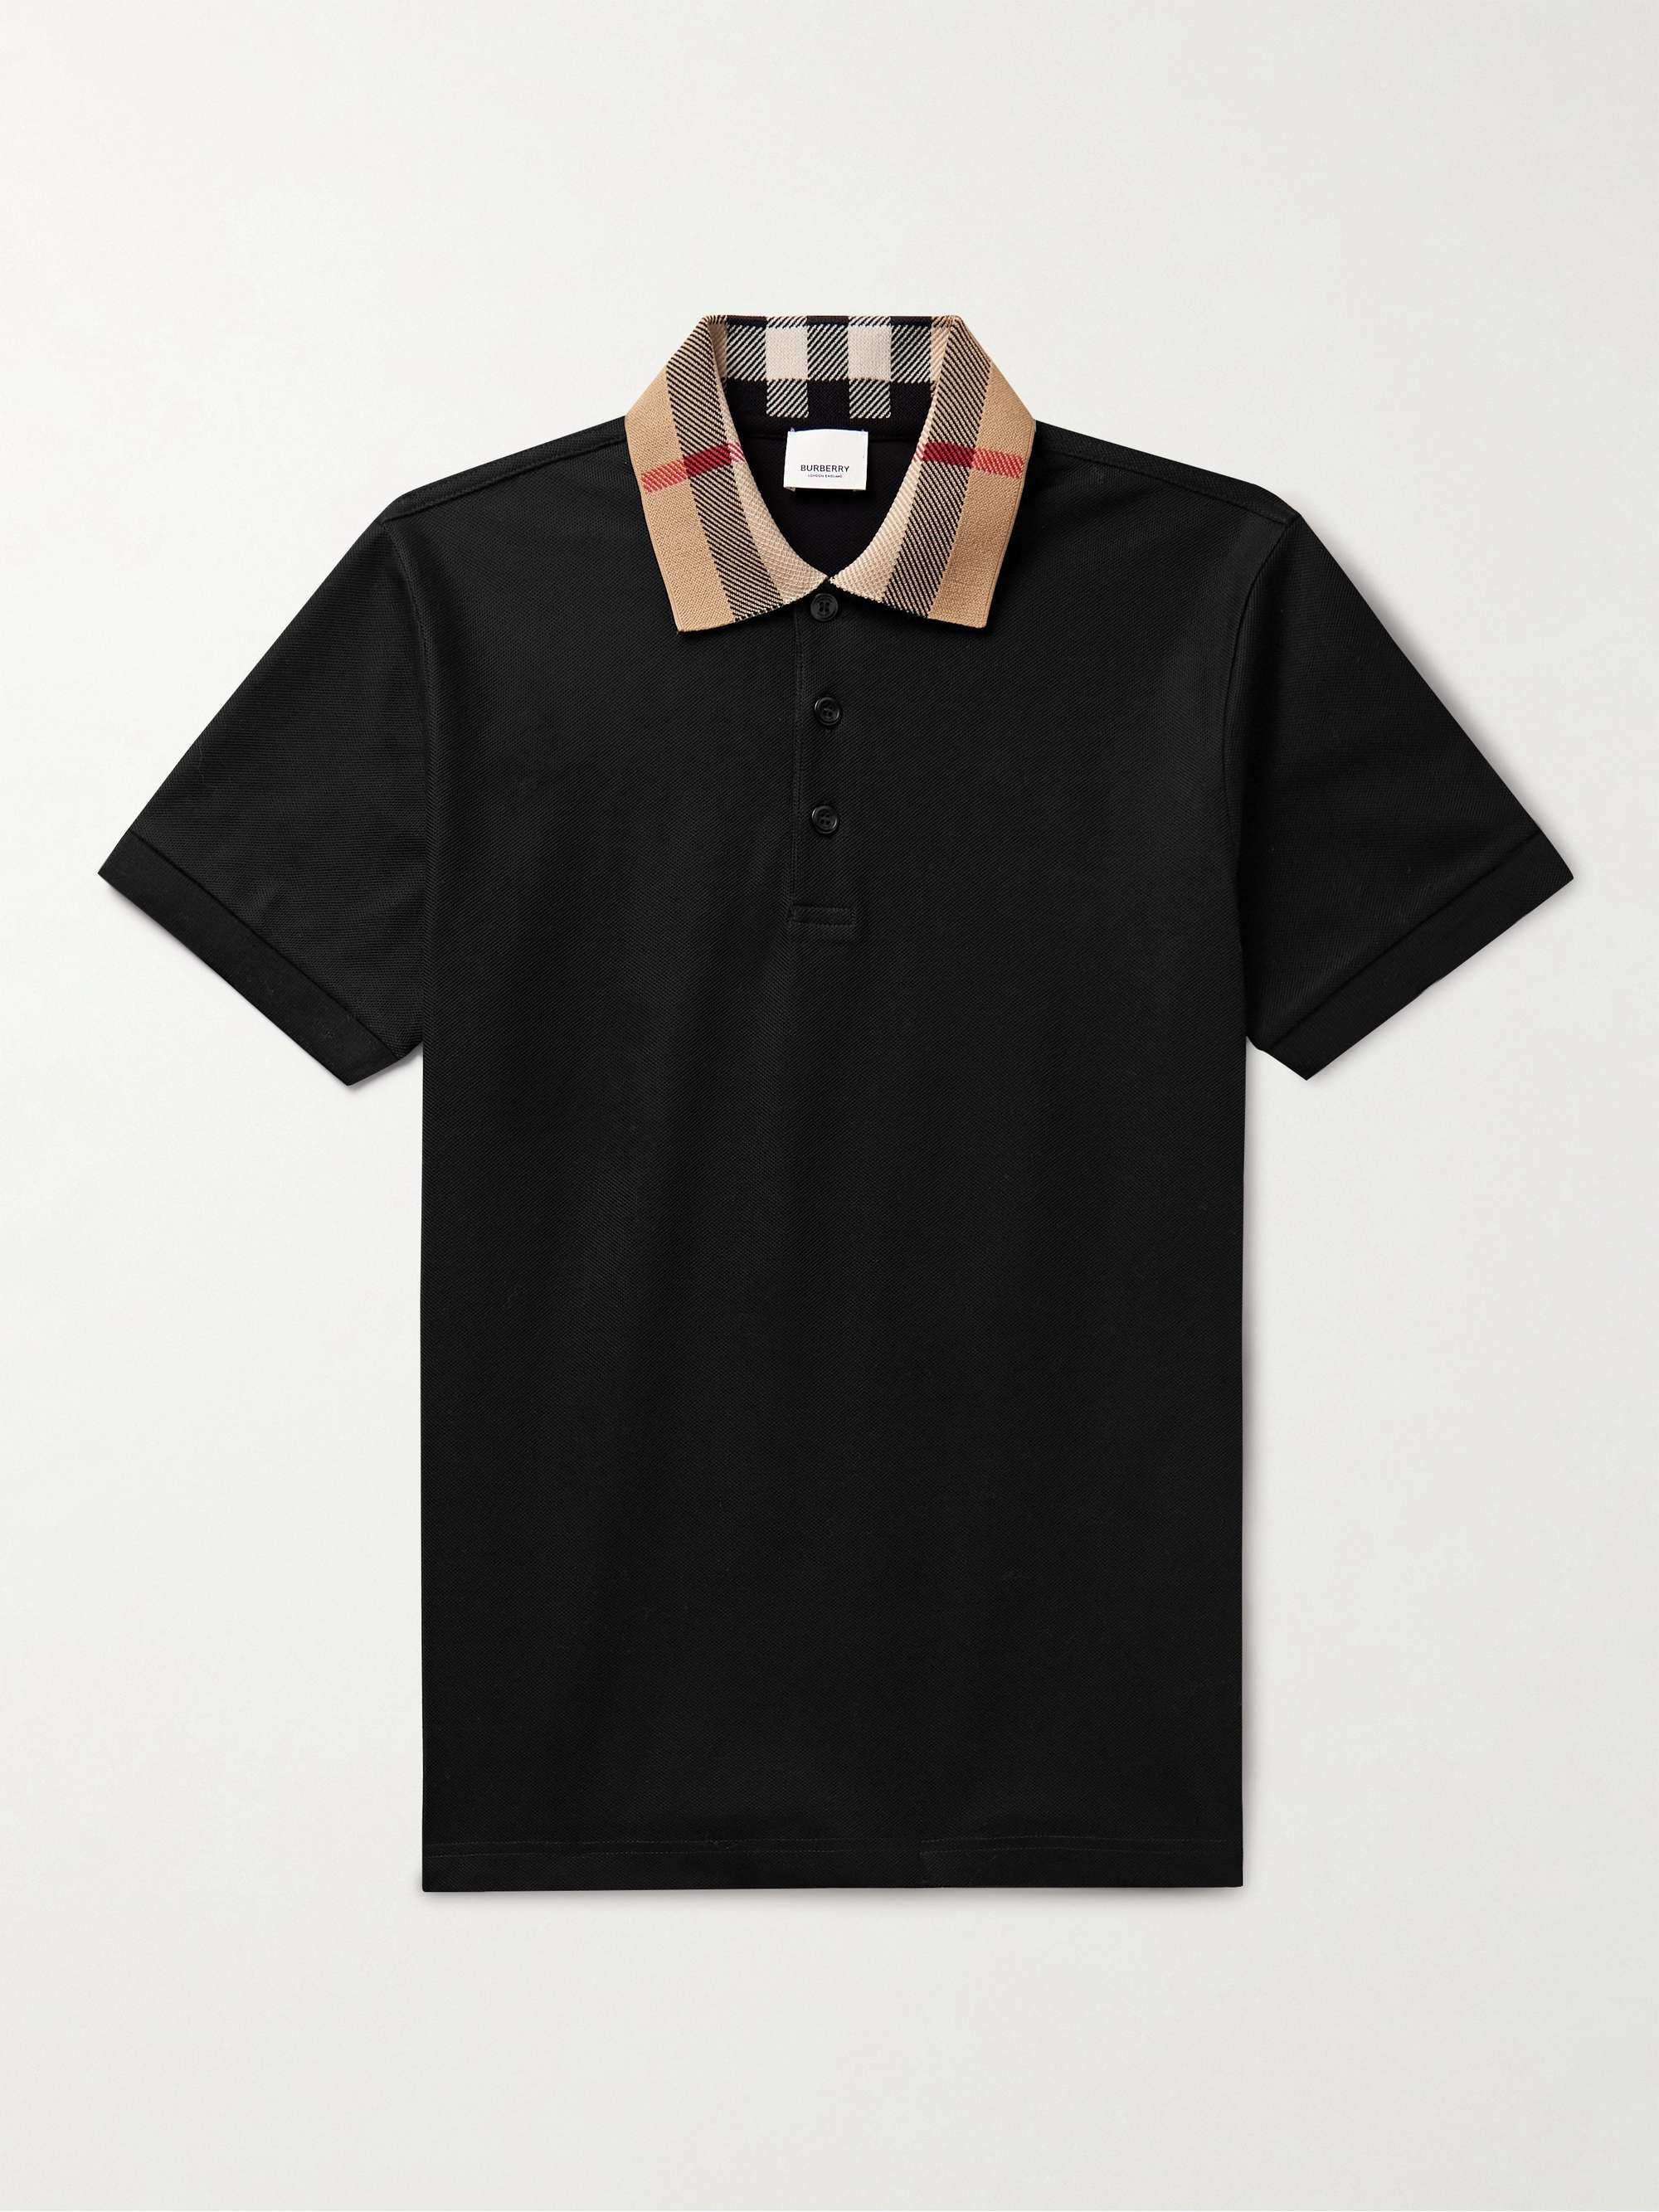 Burberry Clothing for Men on Sale Now